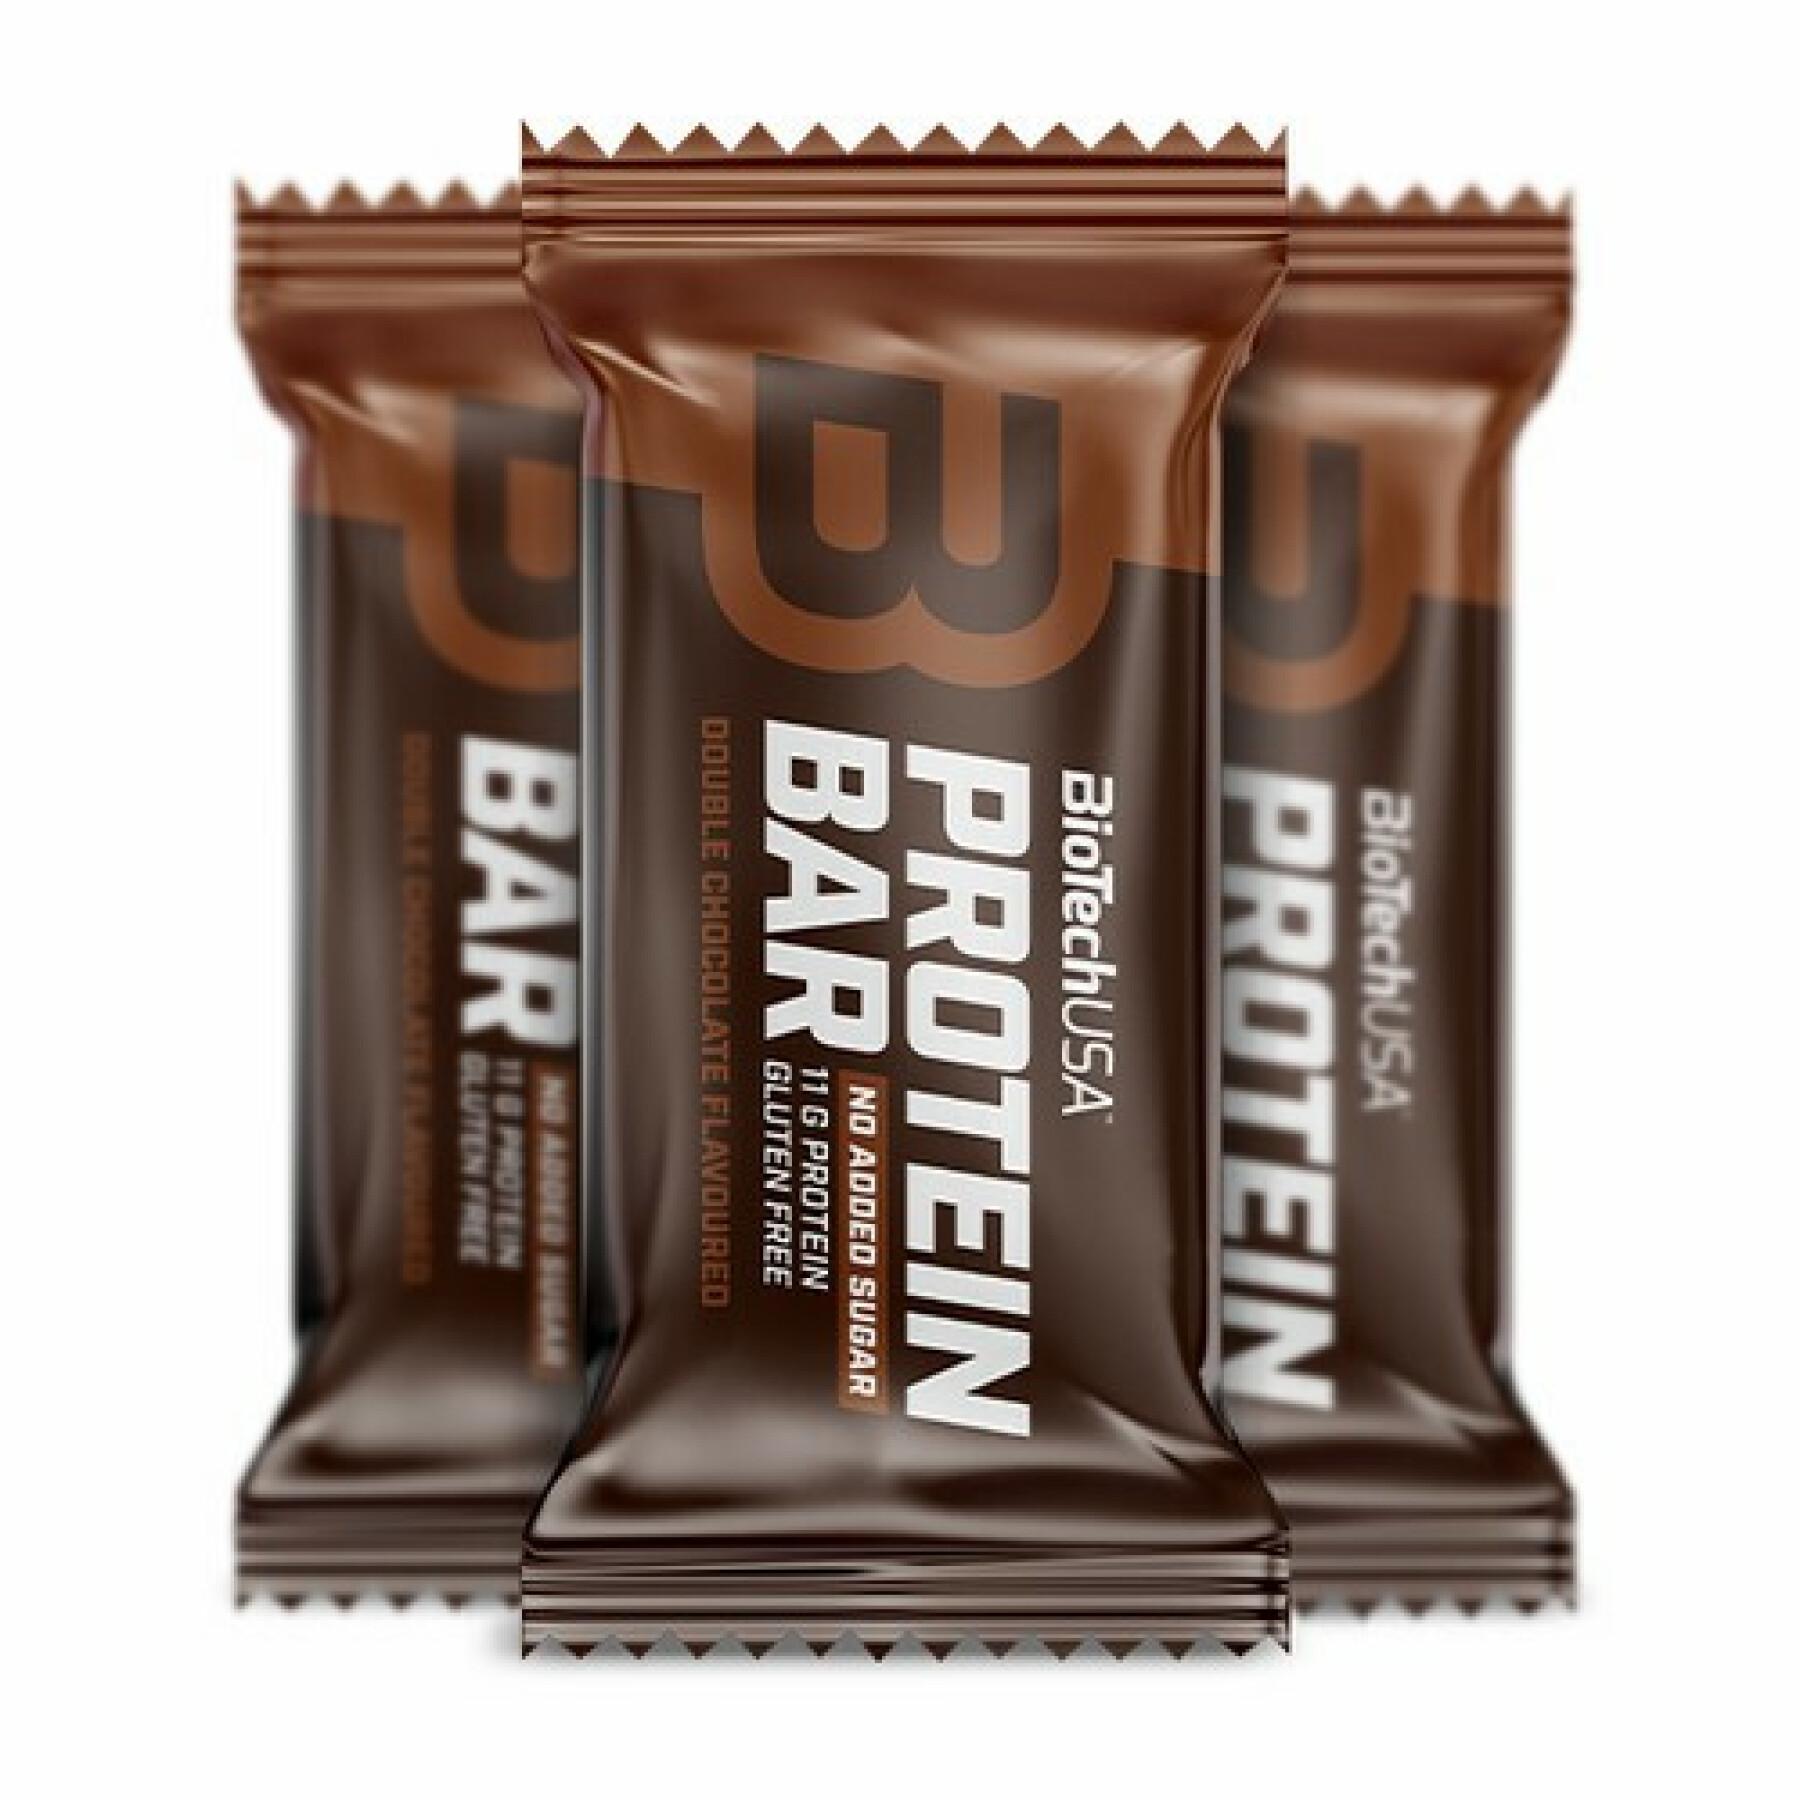 Protein bar snack boxes Biotech USA - Double chocolat